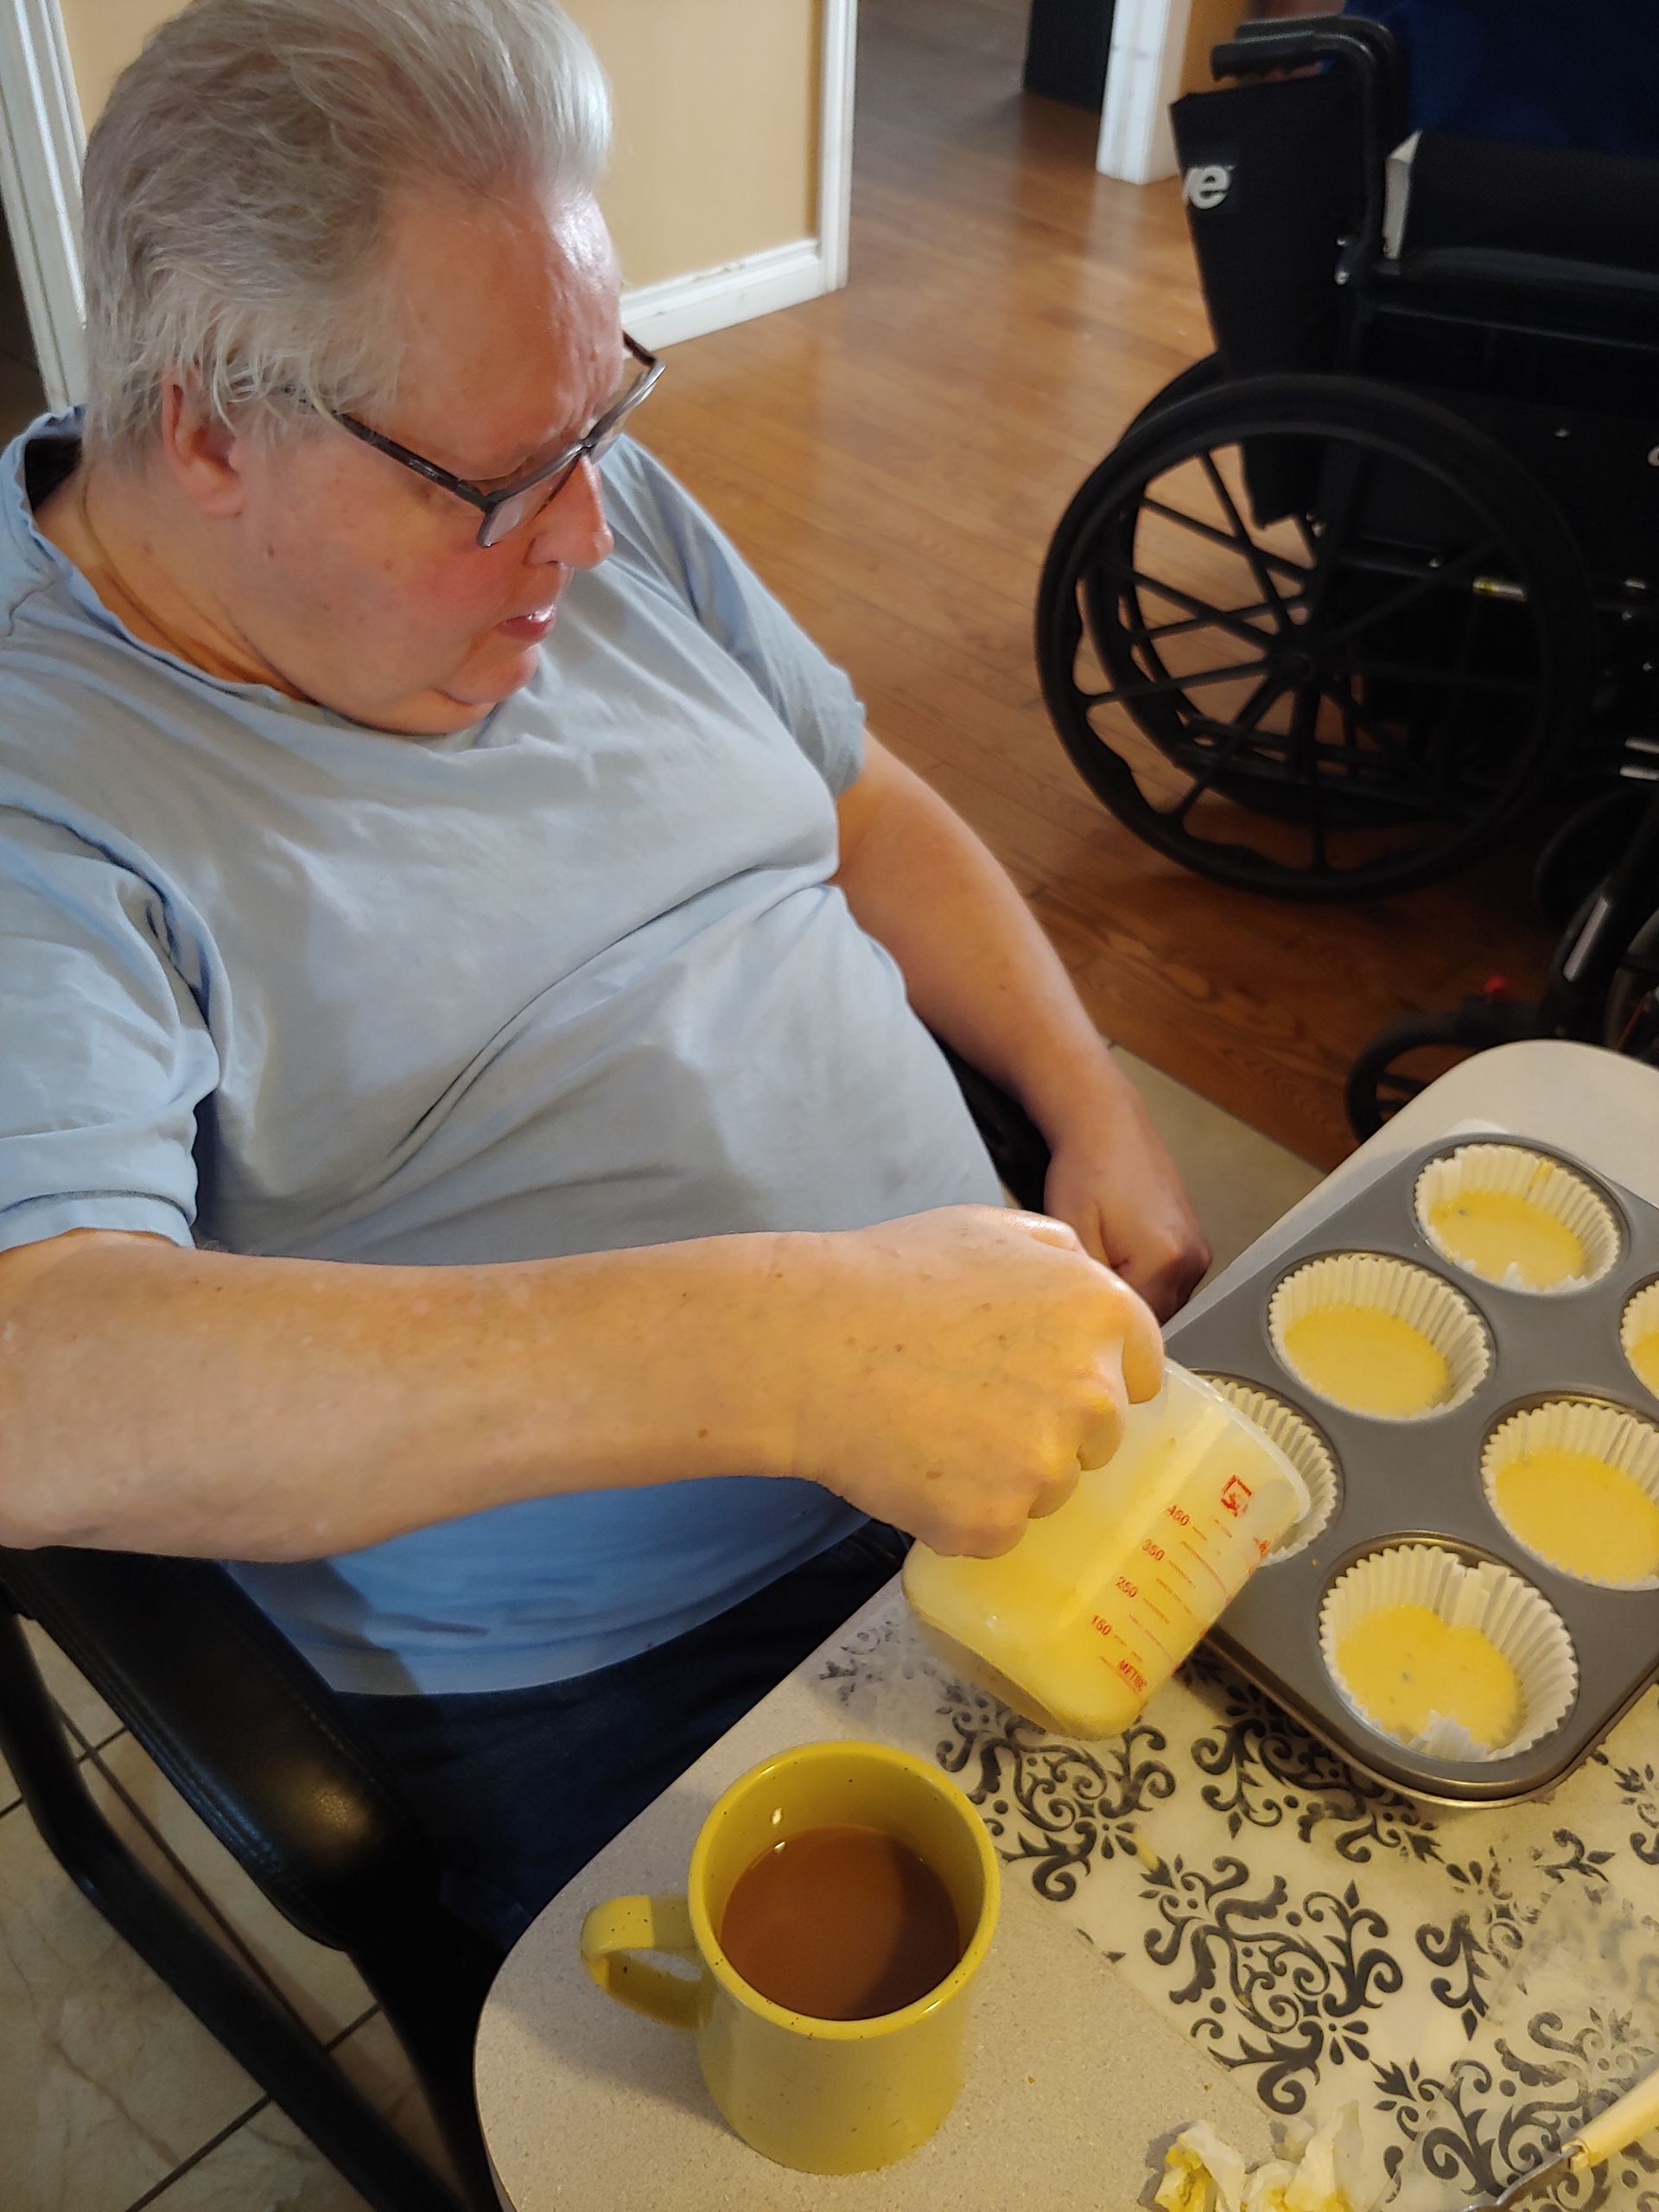 a man in a wheelchair pours liquid from a cup into a muffin baking tray